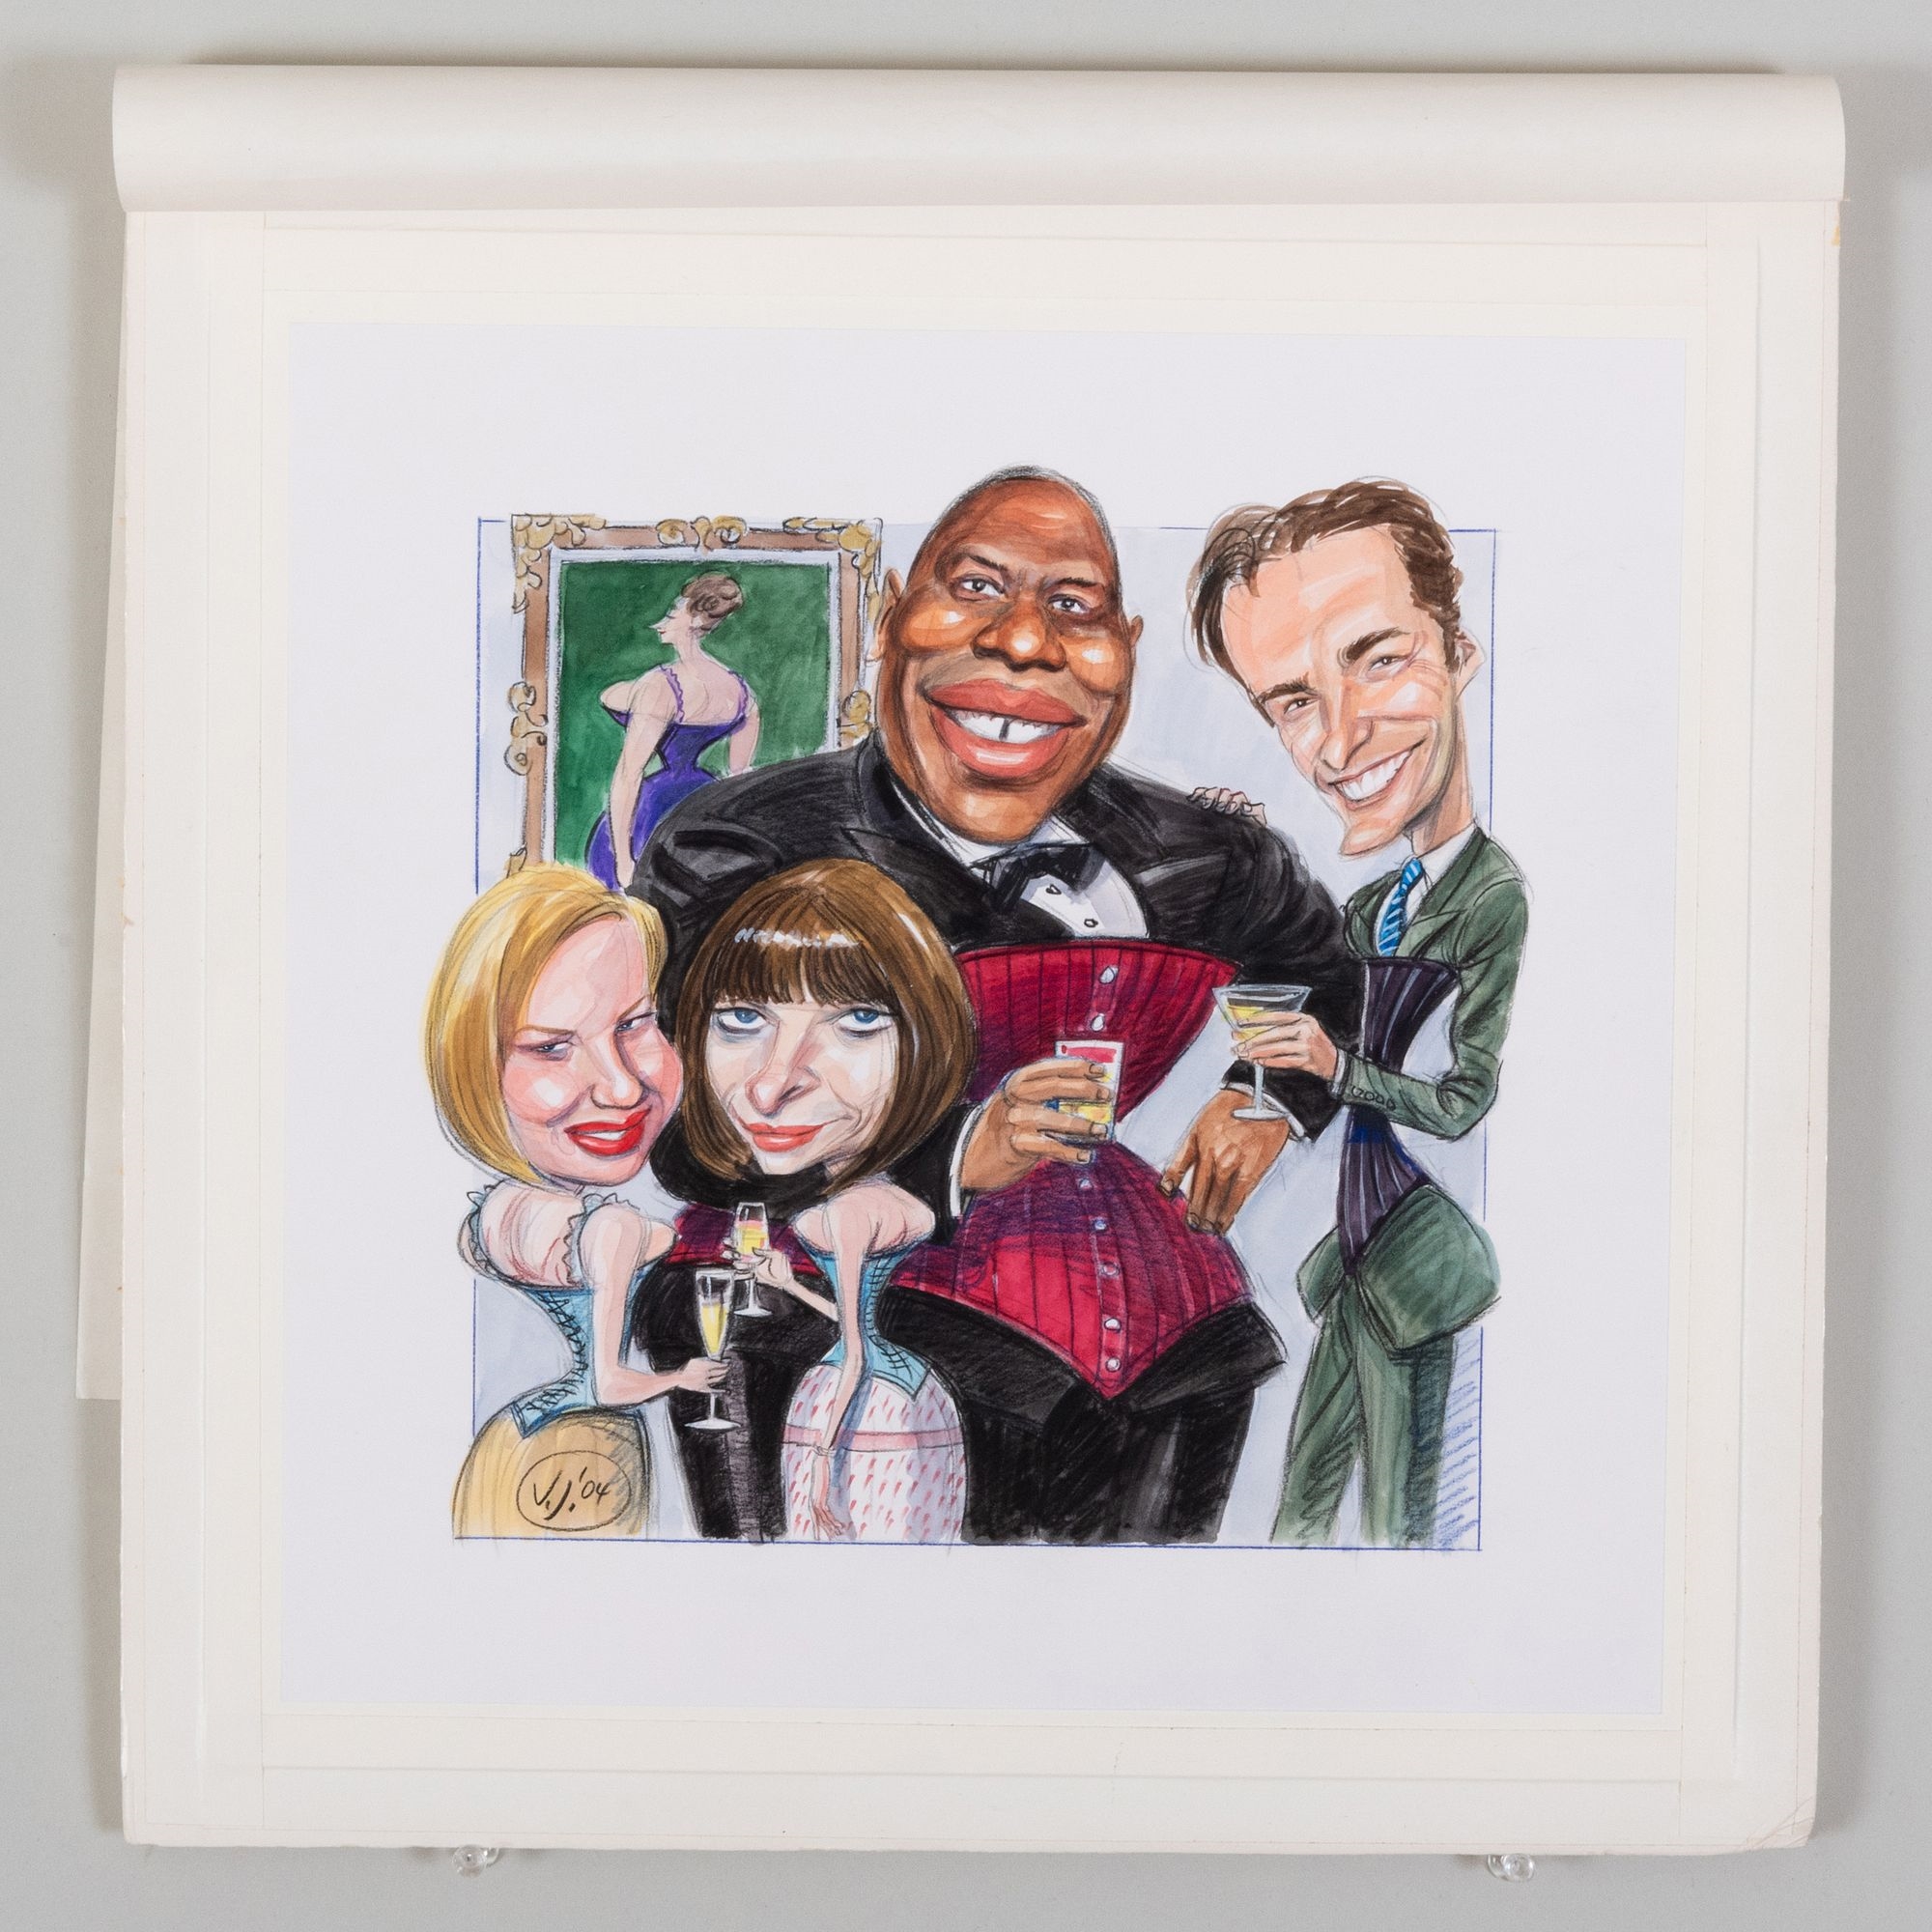 Artwork by Victor Juhasz, André, Anna, Renee and Hugh, Made of Watercolor and pencil on paper